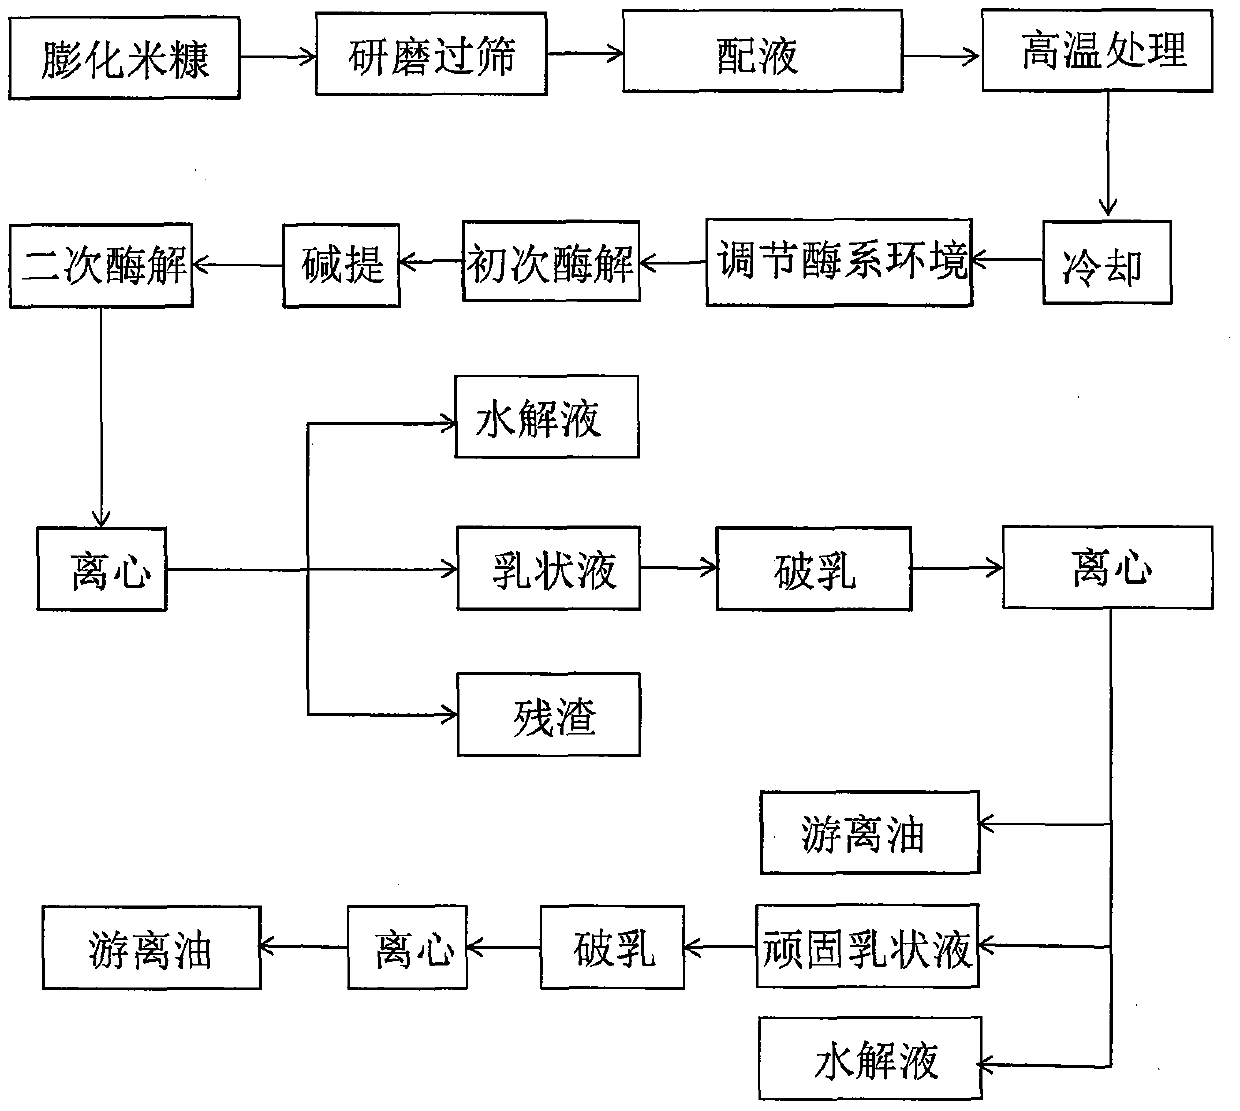 Demulsification method of emulsion formed by extracting rice oil with aqueous enzymatic method